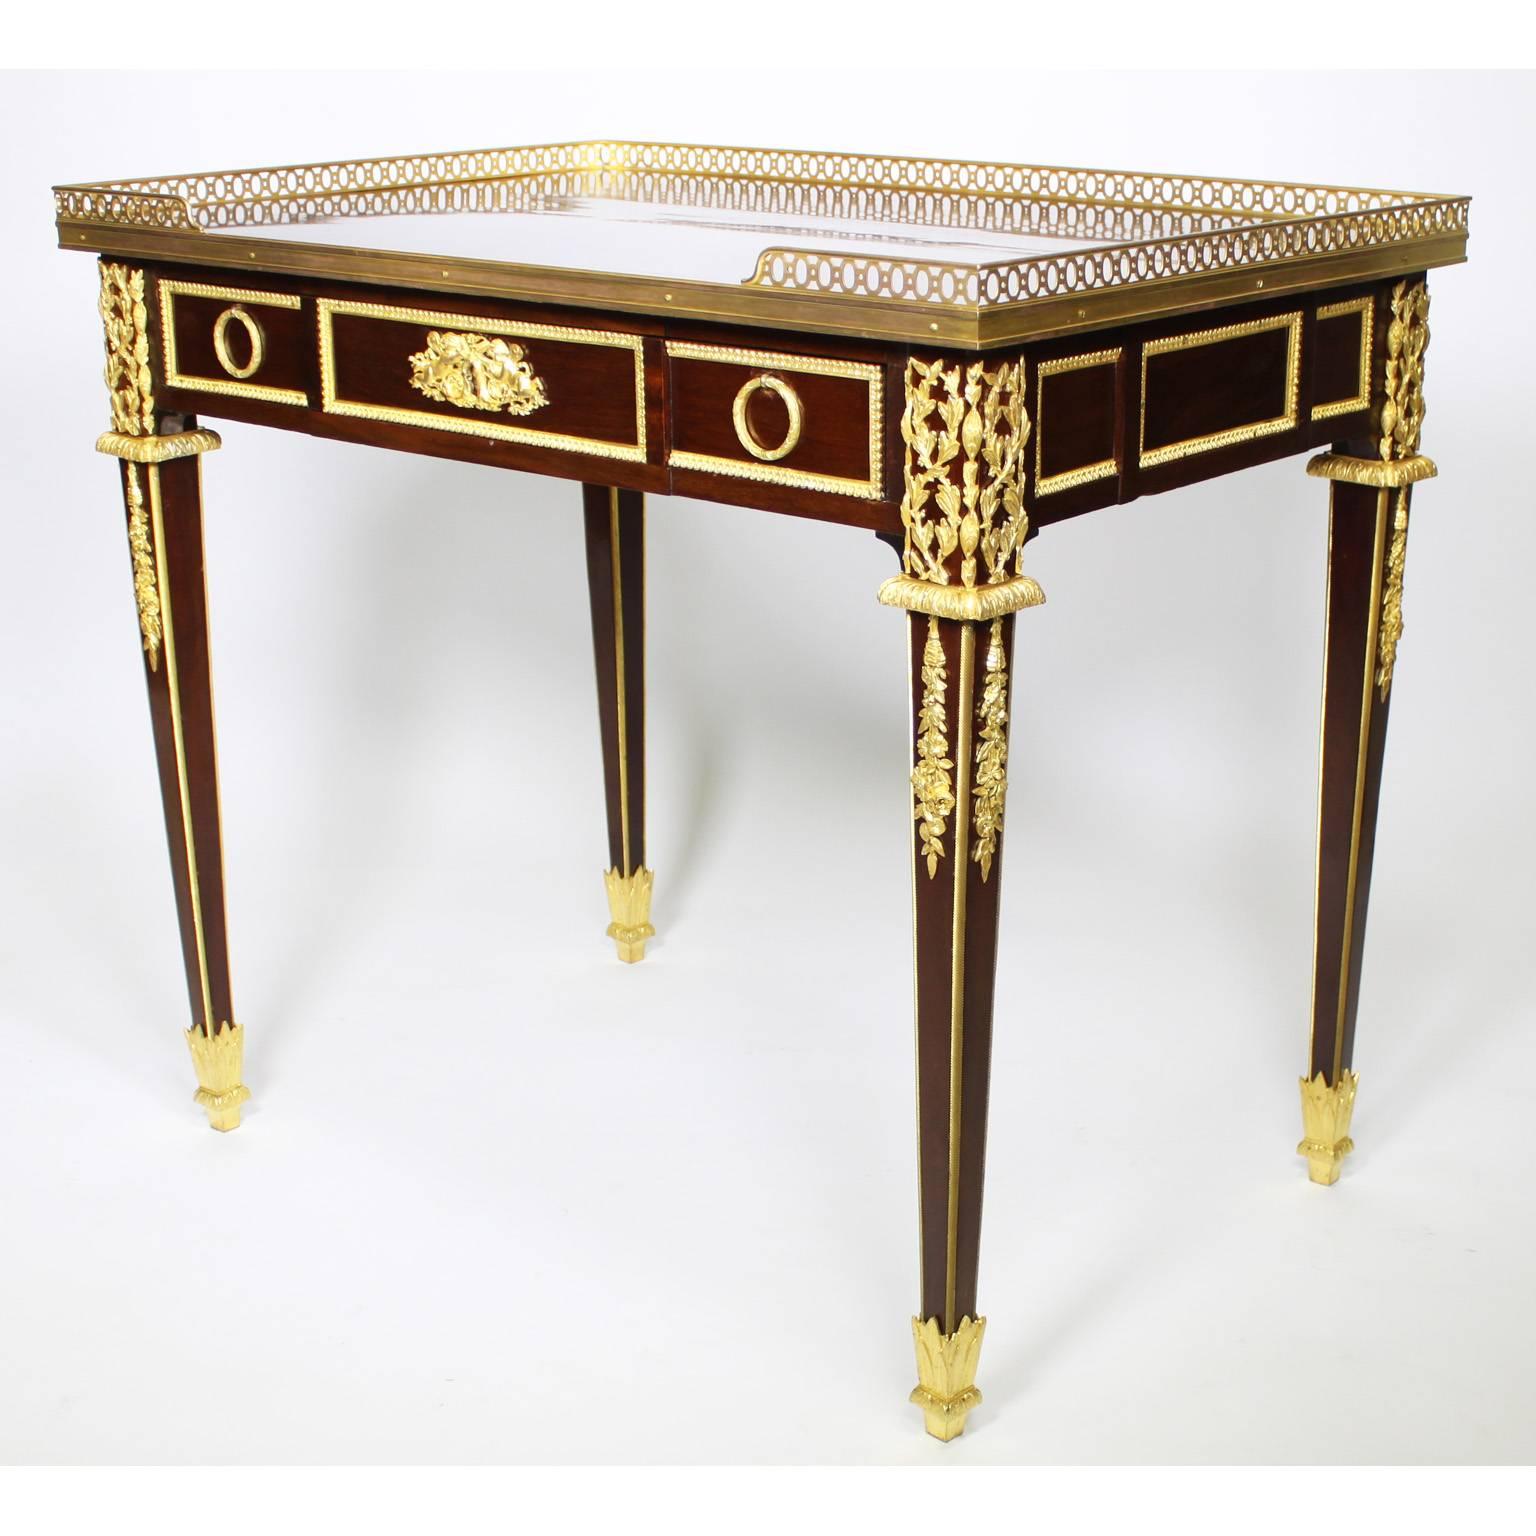 A fine French 19th-20th century Louis XVI style mahogany and gilt bronze-mounted single drawer side table with finely chased floral and cherubs mounts and a pierced-bronze gallery, in the manner of François Linke (1855-1946), circa 1900,